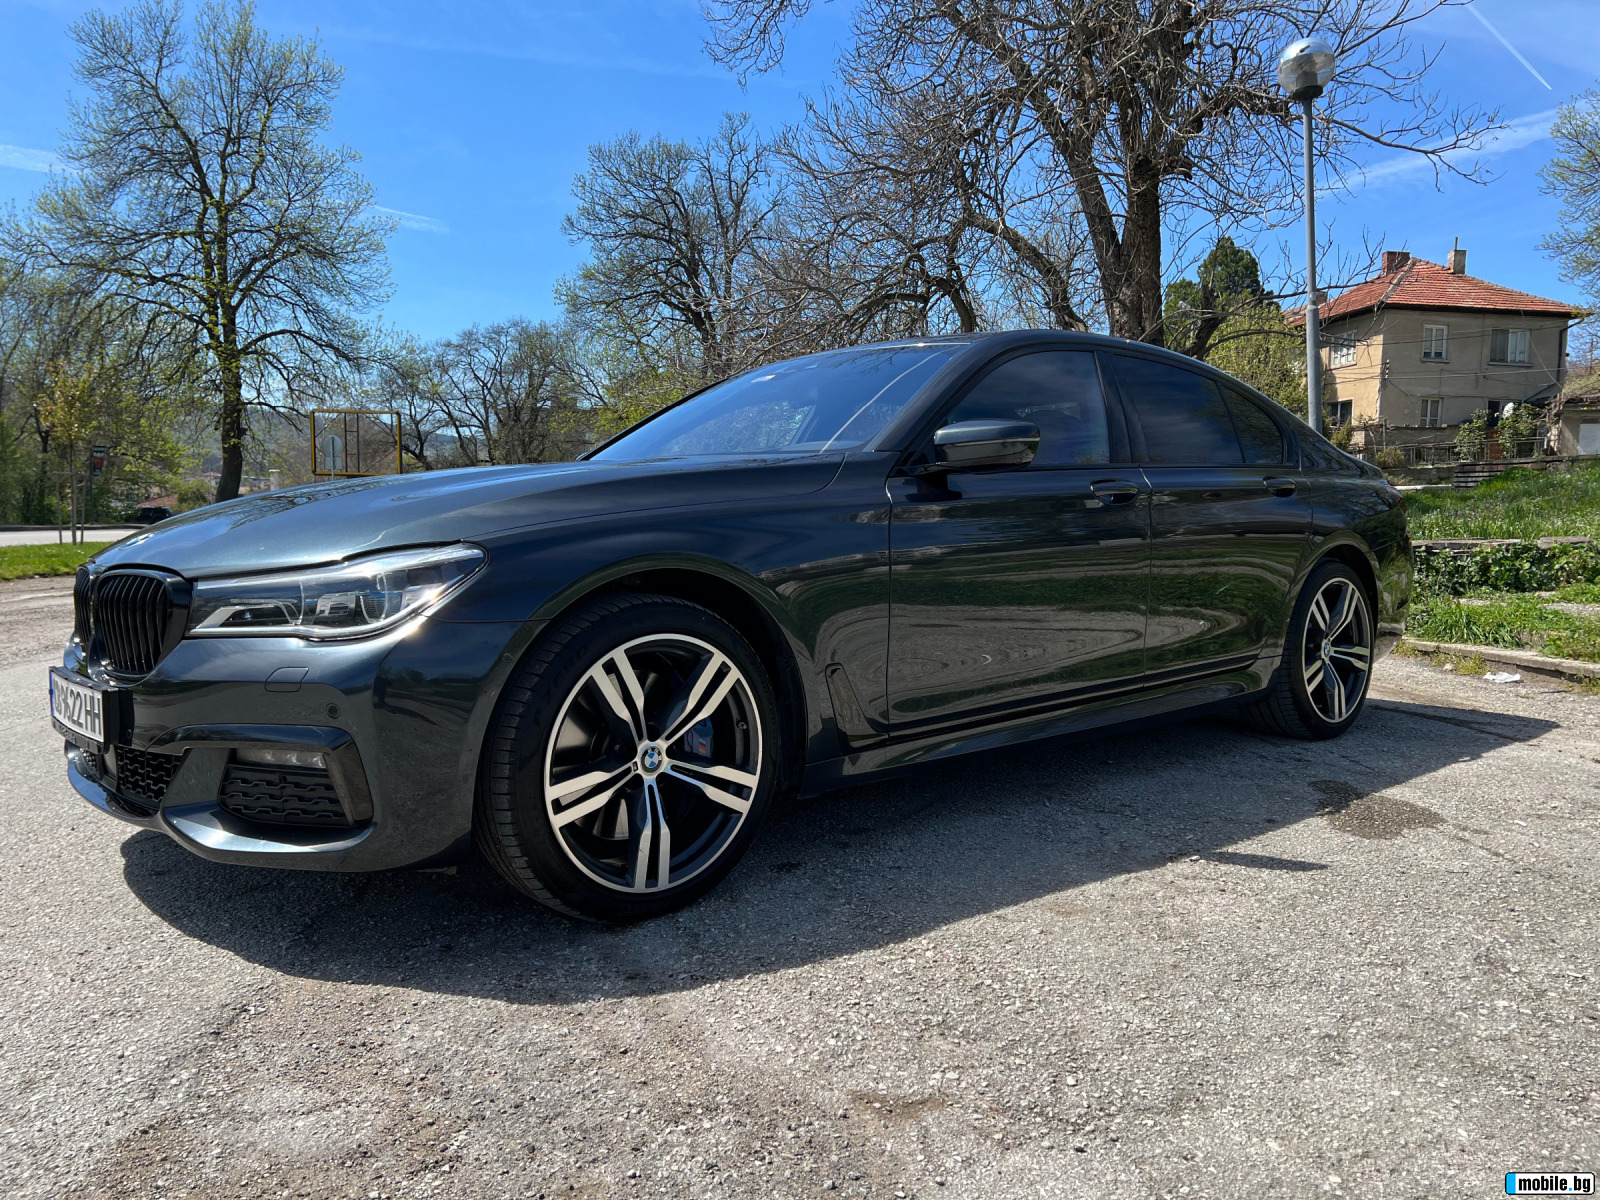 BMW 740 Drive! M package | Mobile.bg   2